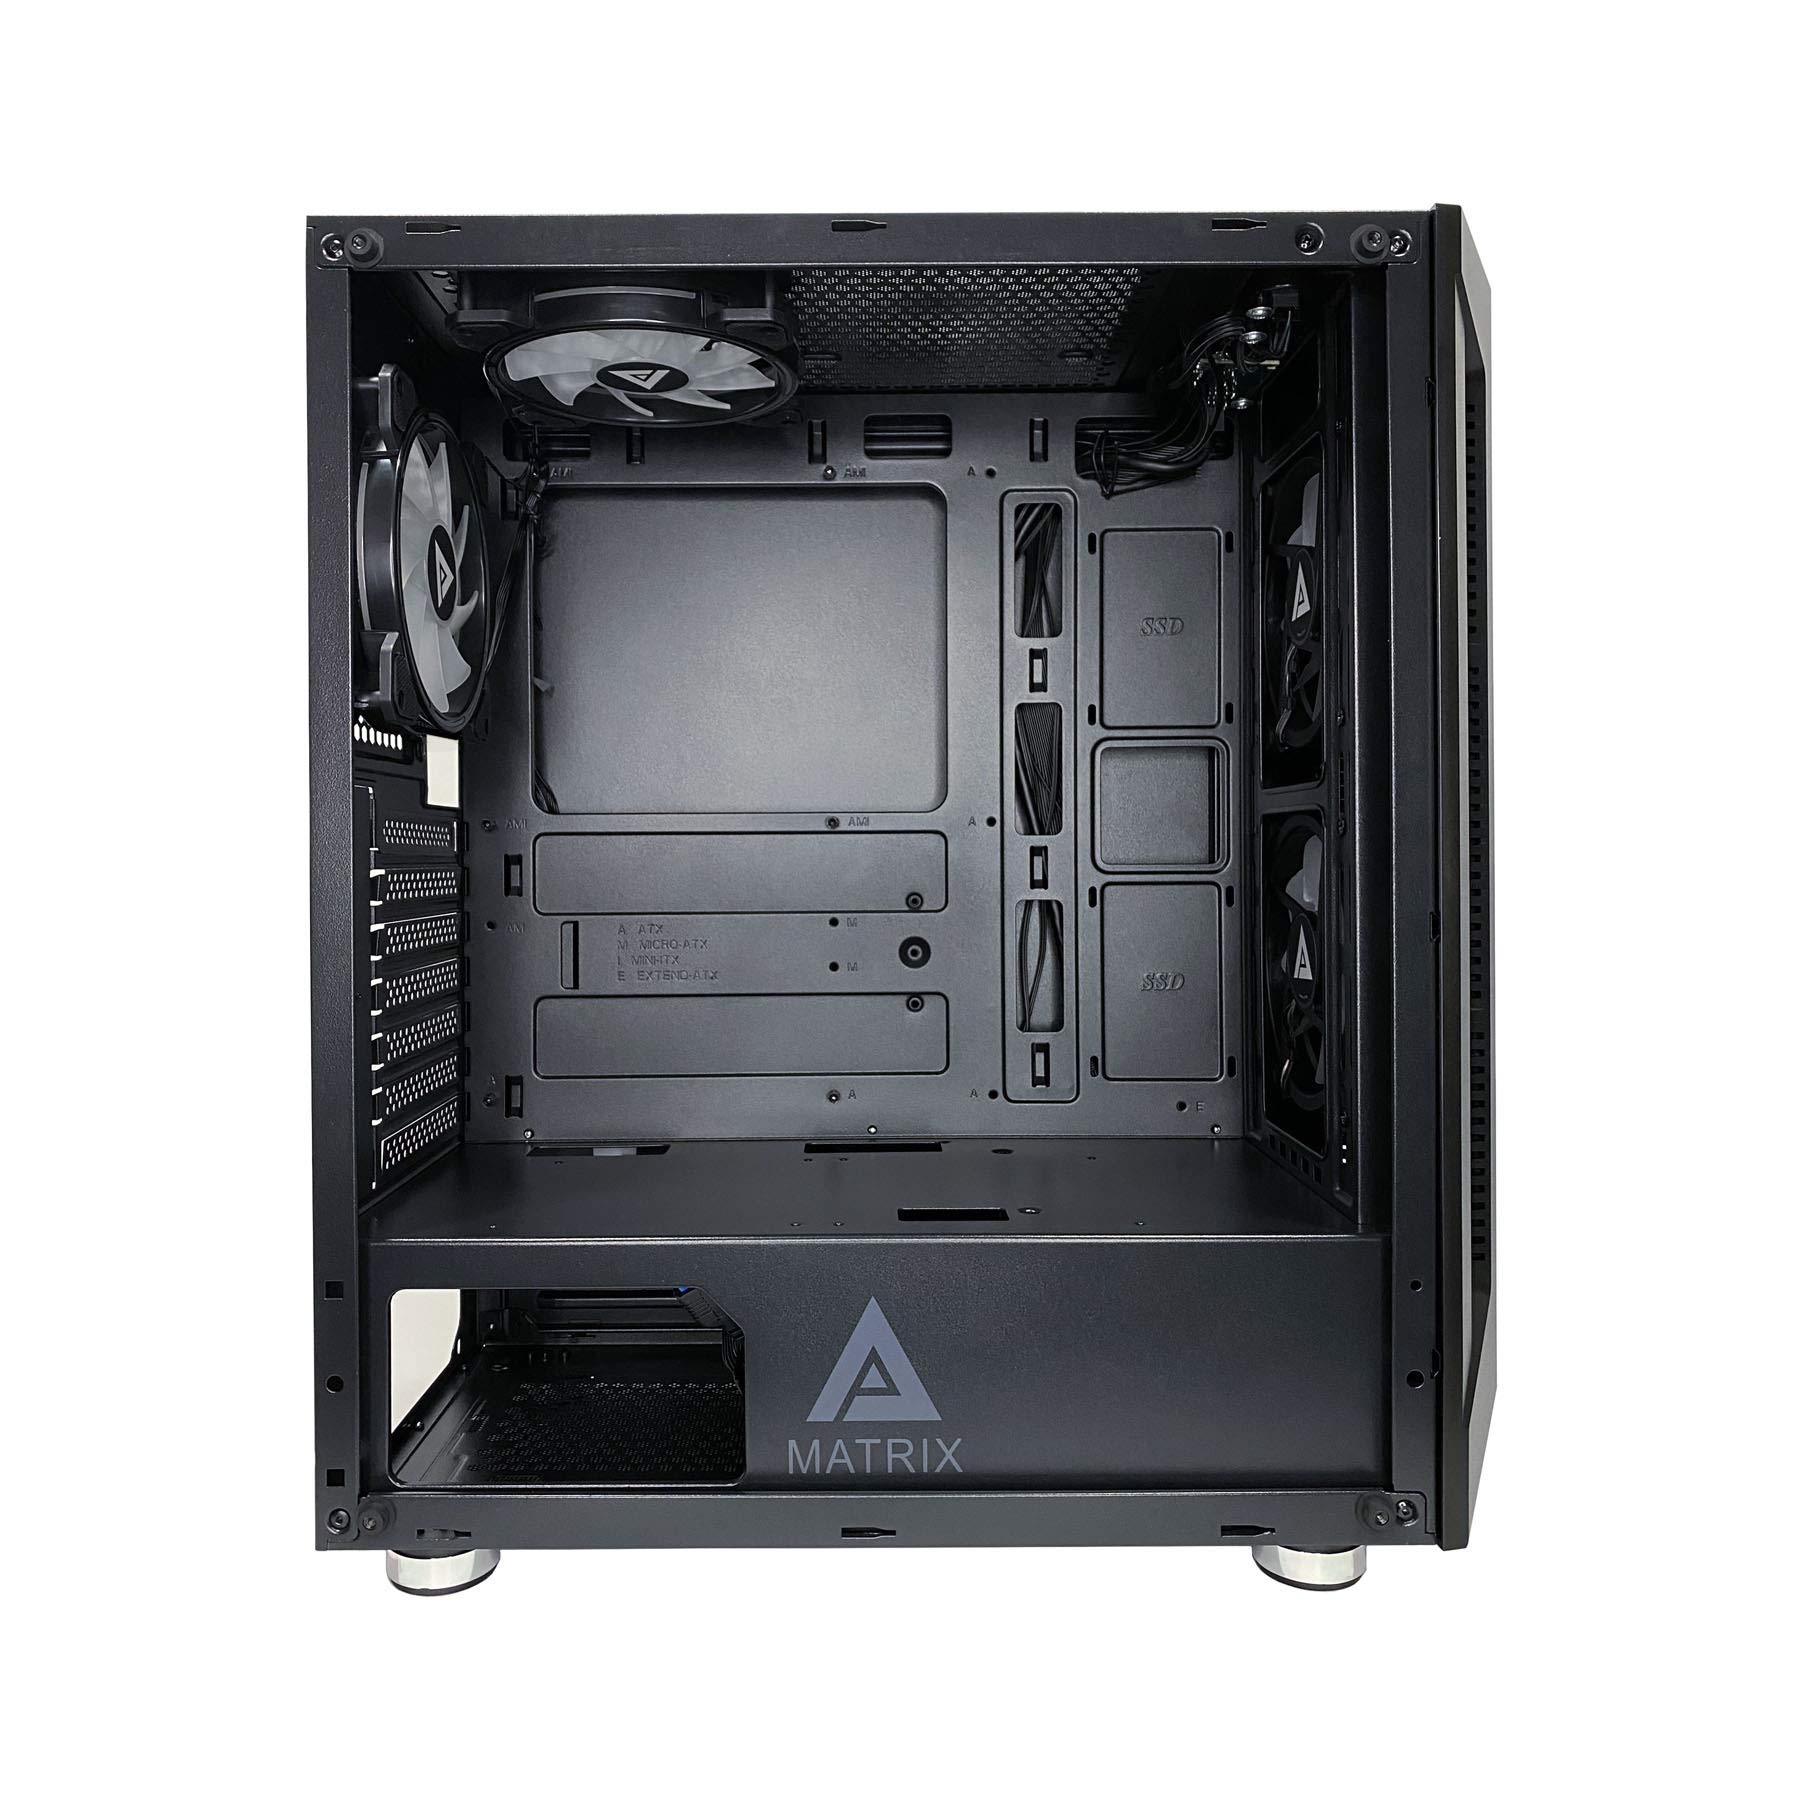 Apevia Matrix-BK Mid Tower Gaming Case with 1 x Tempered Glass Panel, Top USB3.0/USB2.0/Audio Ports, 4 x RGB Fans, Black Frame